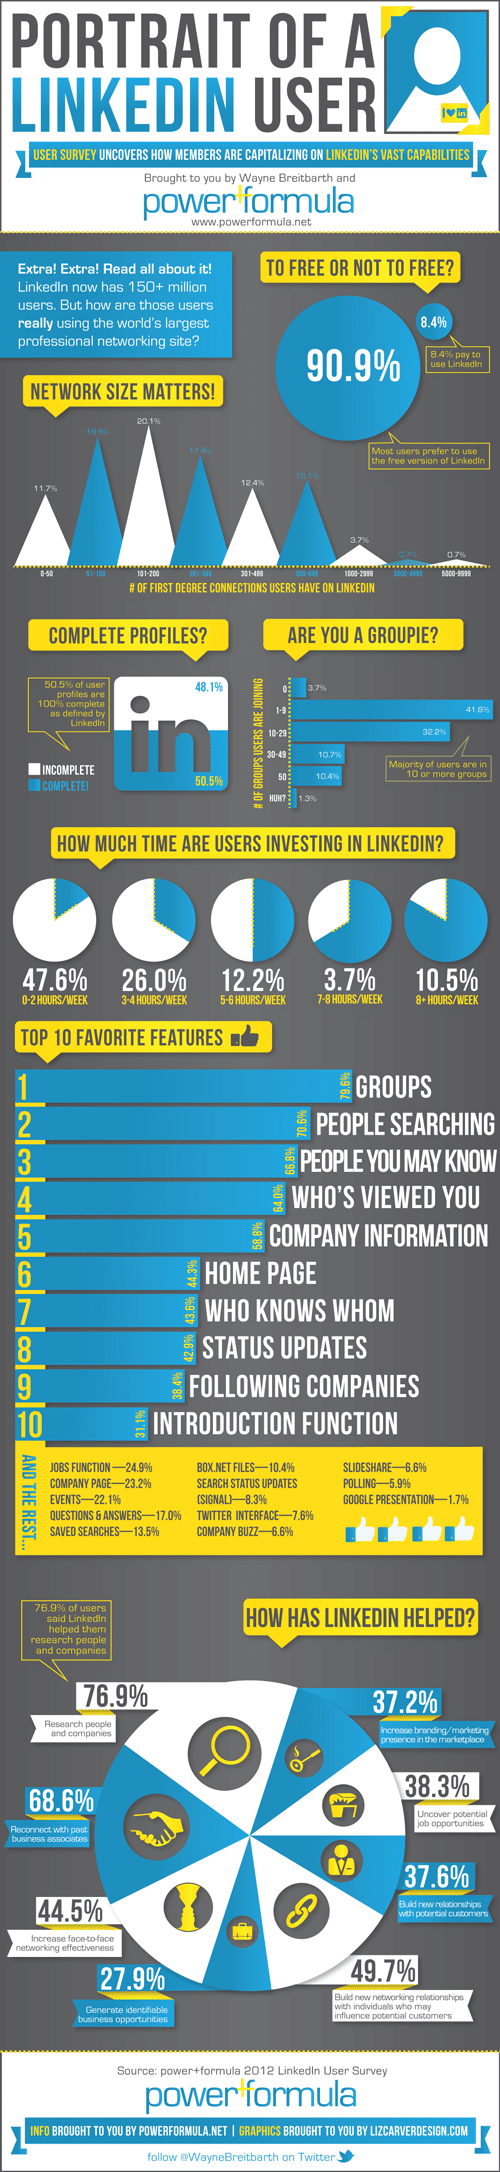 How to harness the power of LinkedIn - Infographic